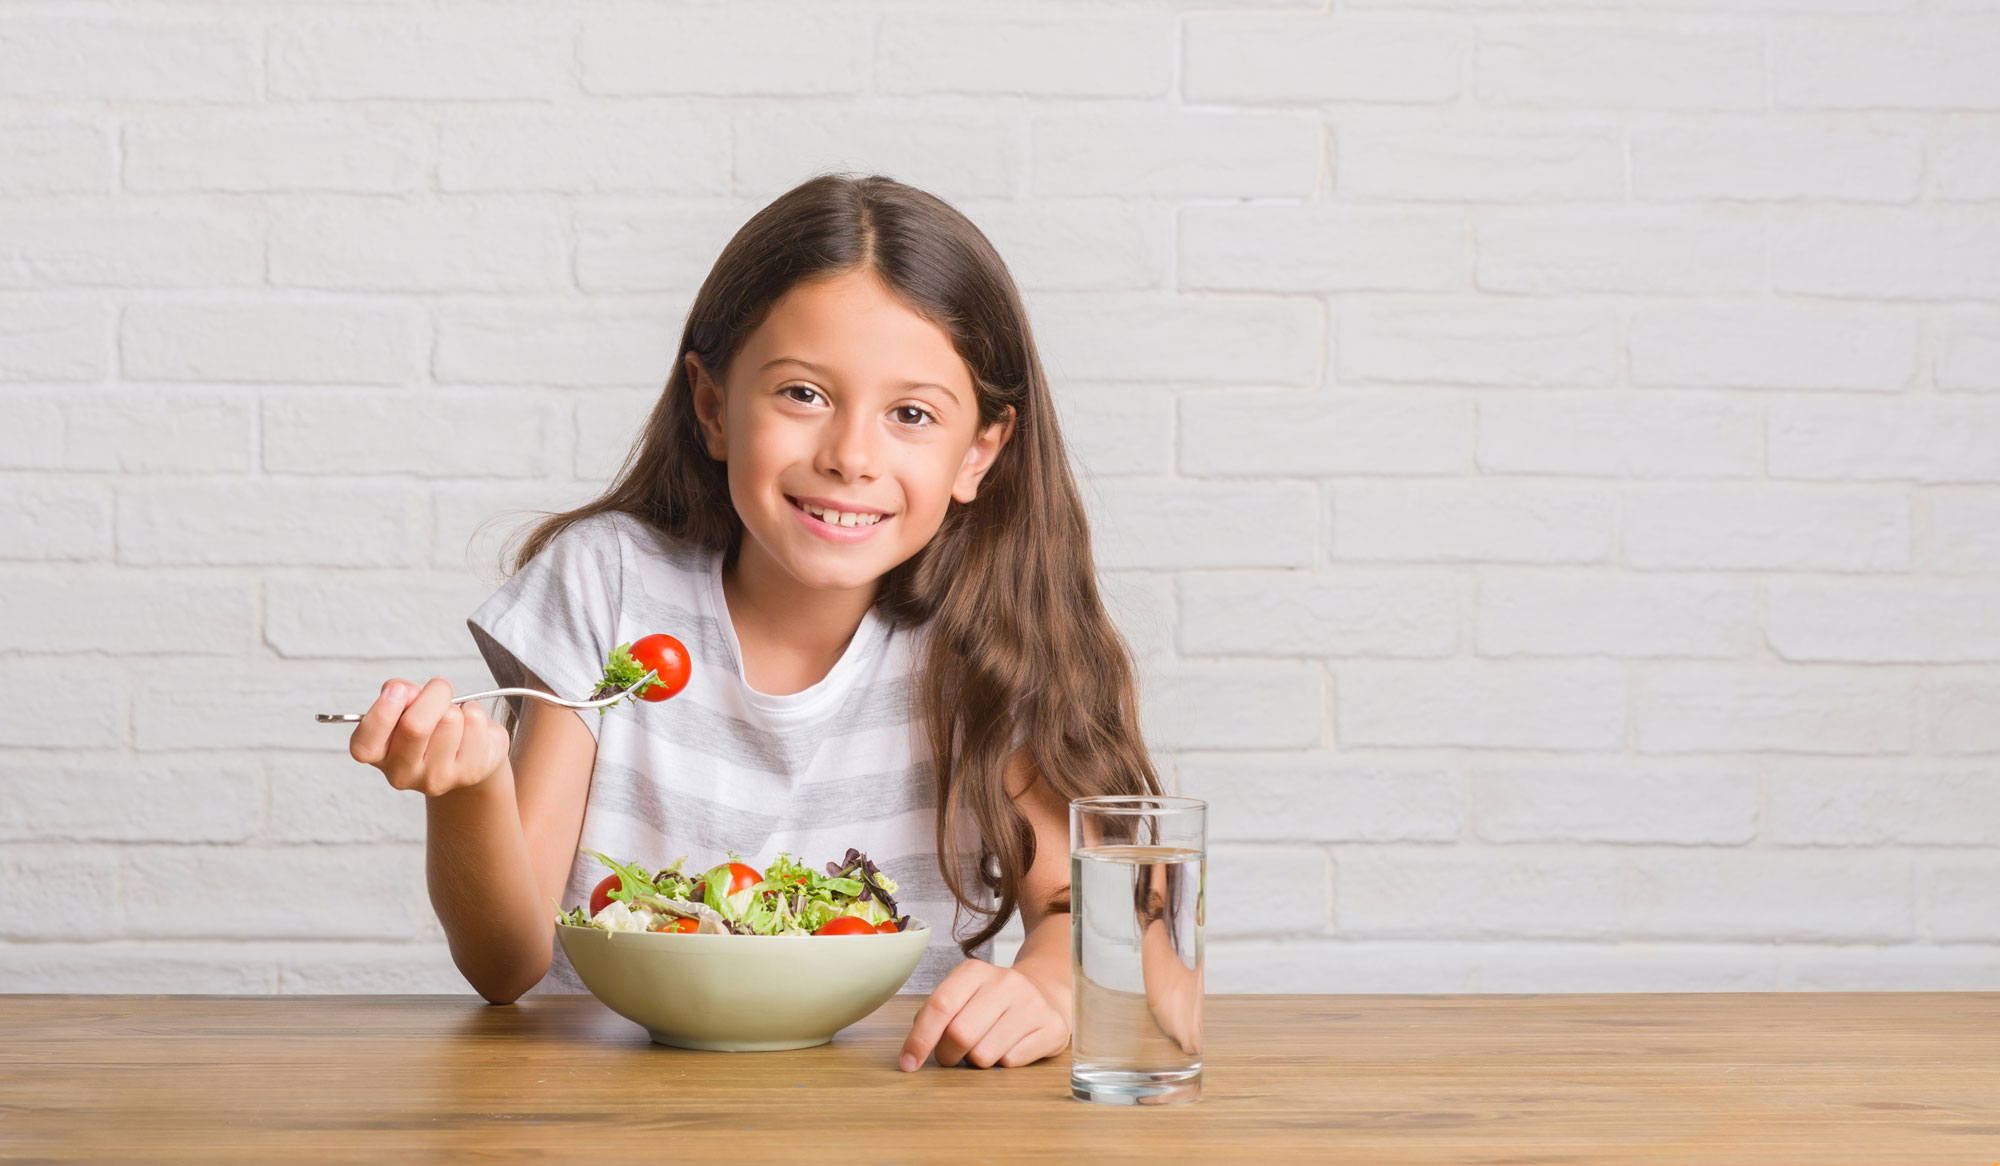 A girl eating a salad with a glass of water